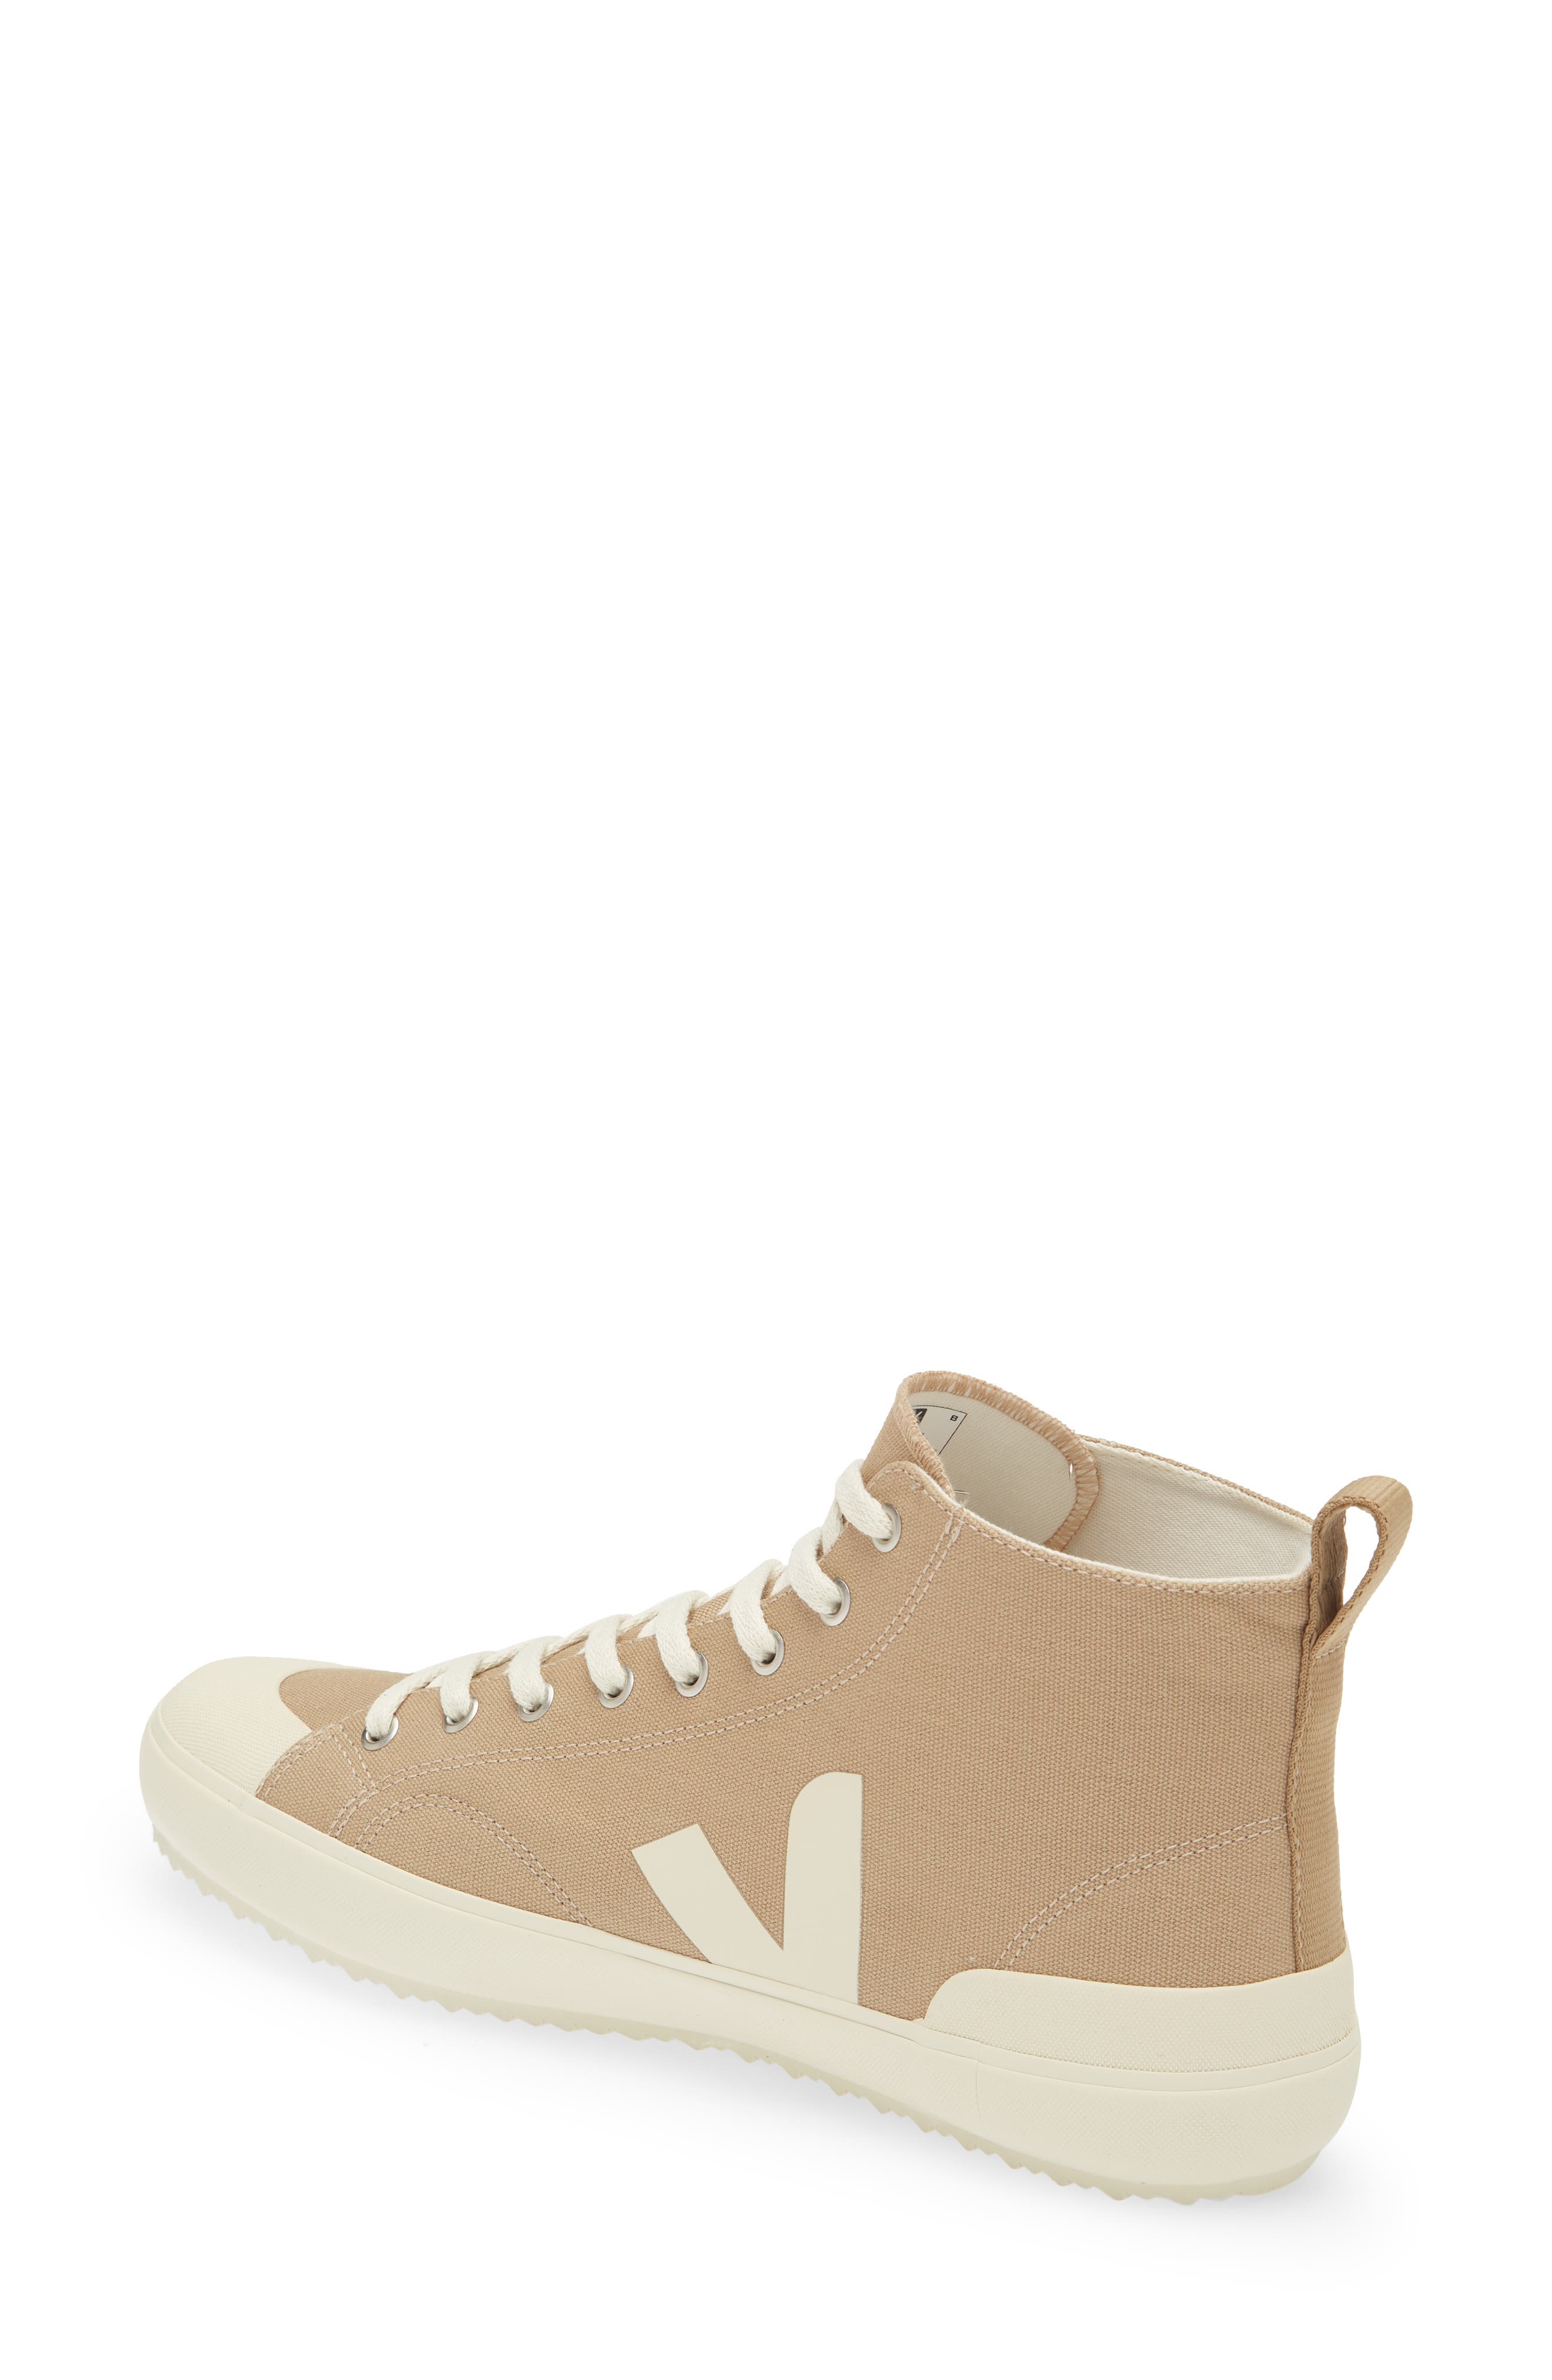 Mens Shoes Trainers Low-top trainers Veja Dune Pierre Nova High Canvas Shoes in Natural for Men 